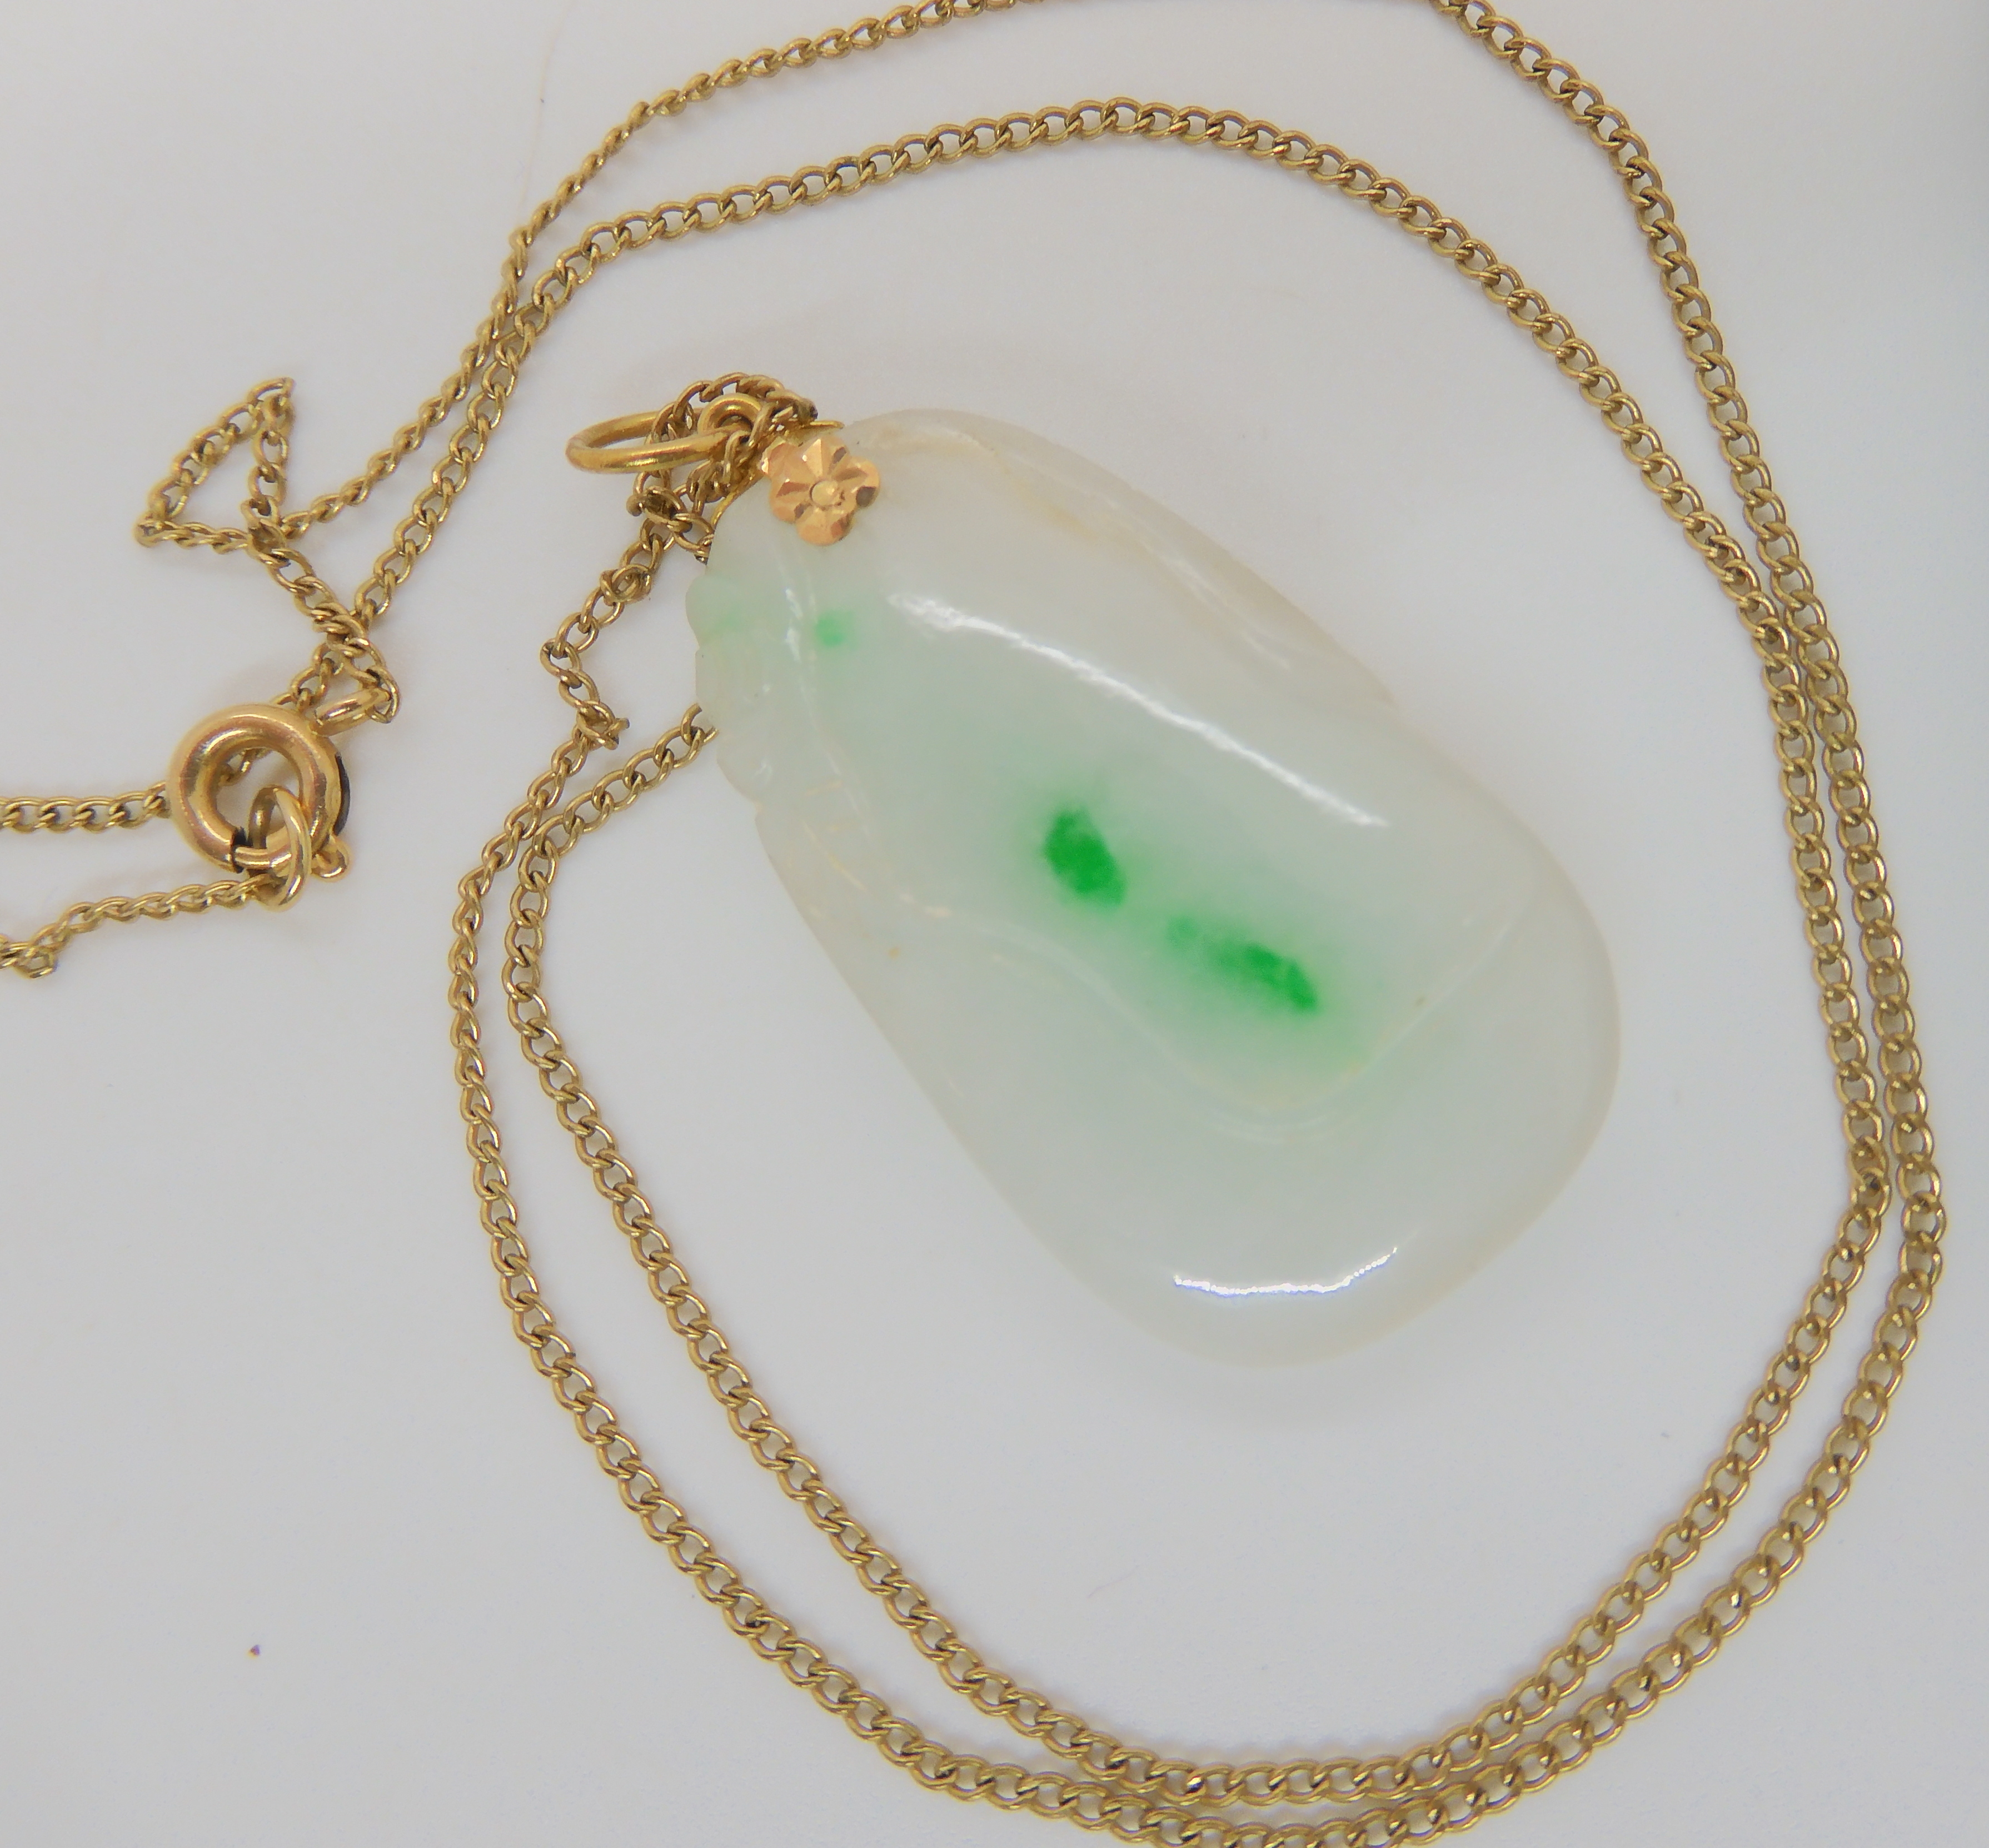 A white Chinese hardstone pendant carved with leaves with splashes of green, mounted in bright